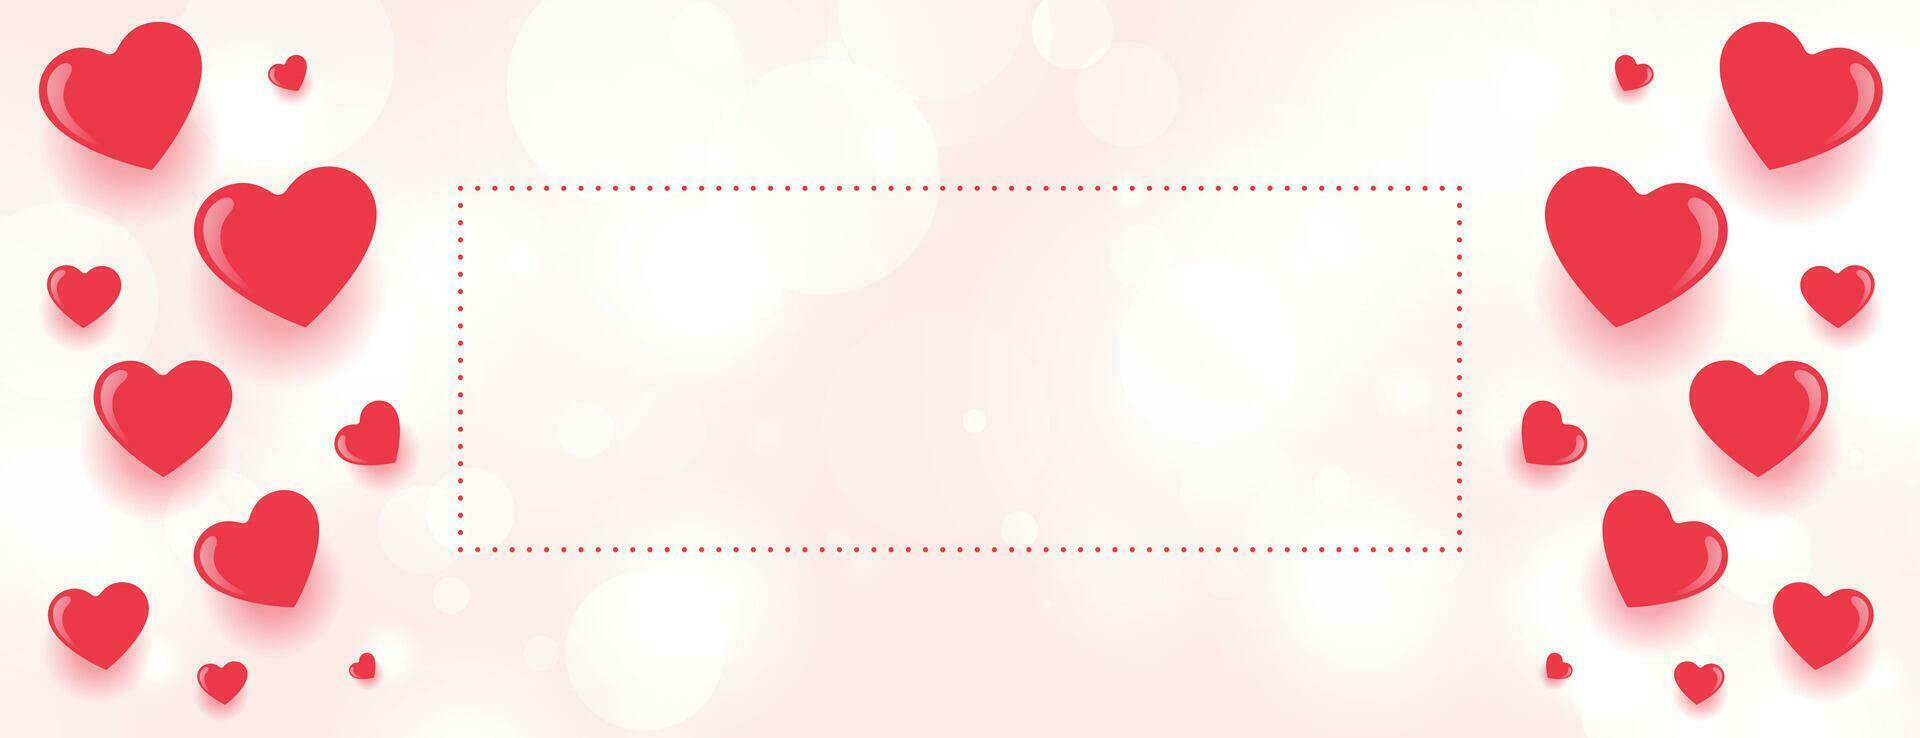 valentines day celebration banner with text space vector